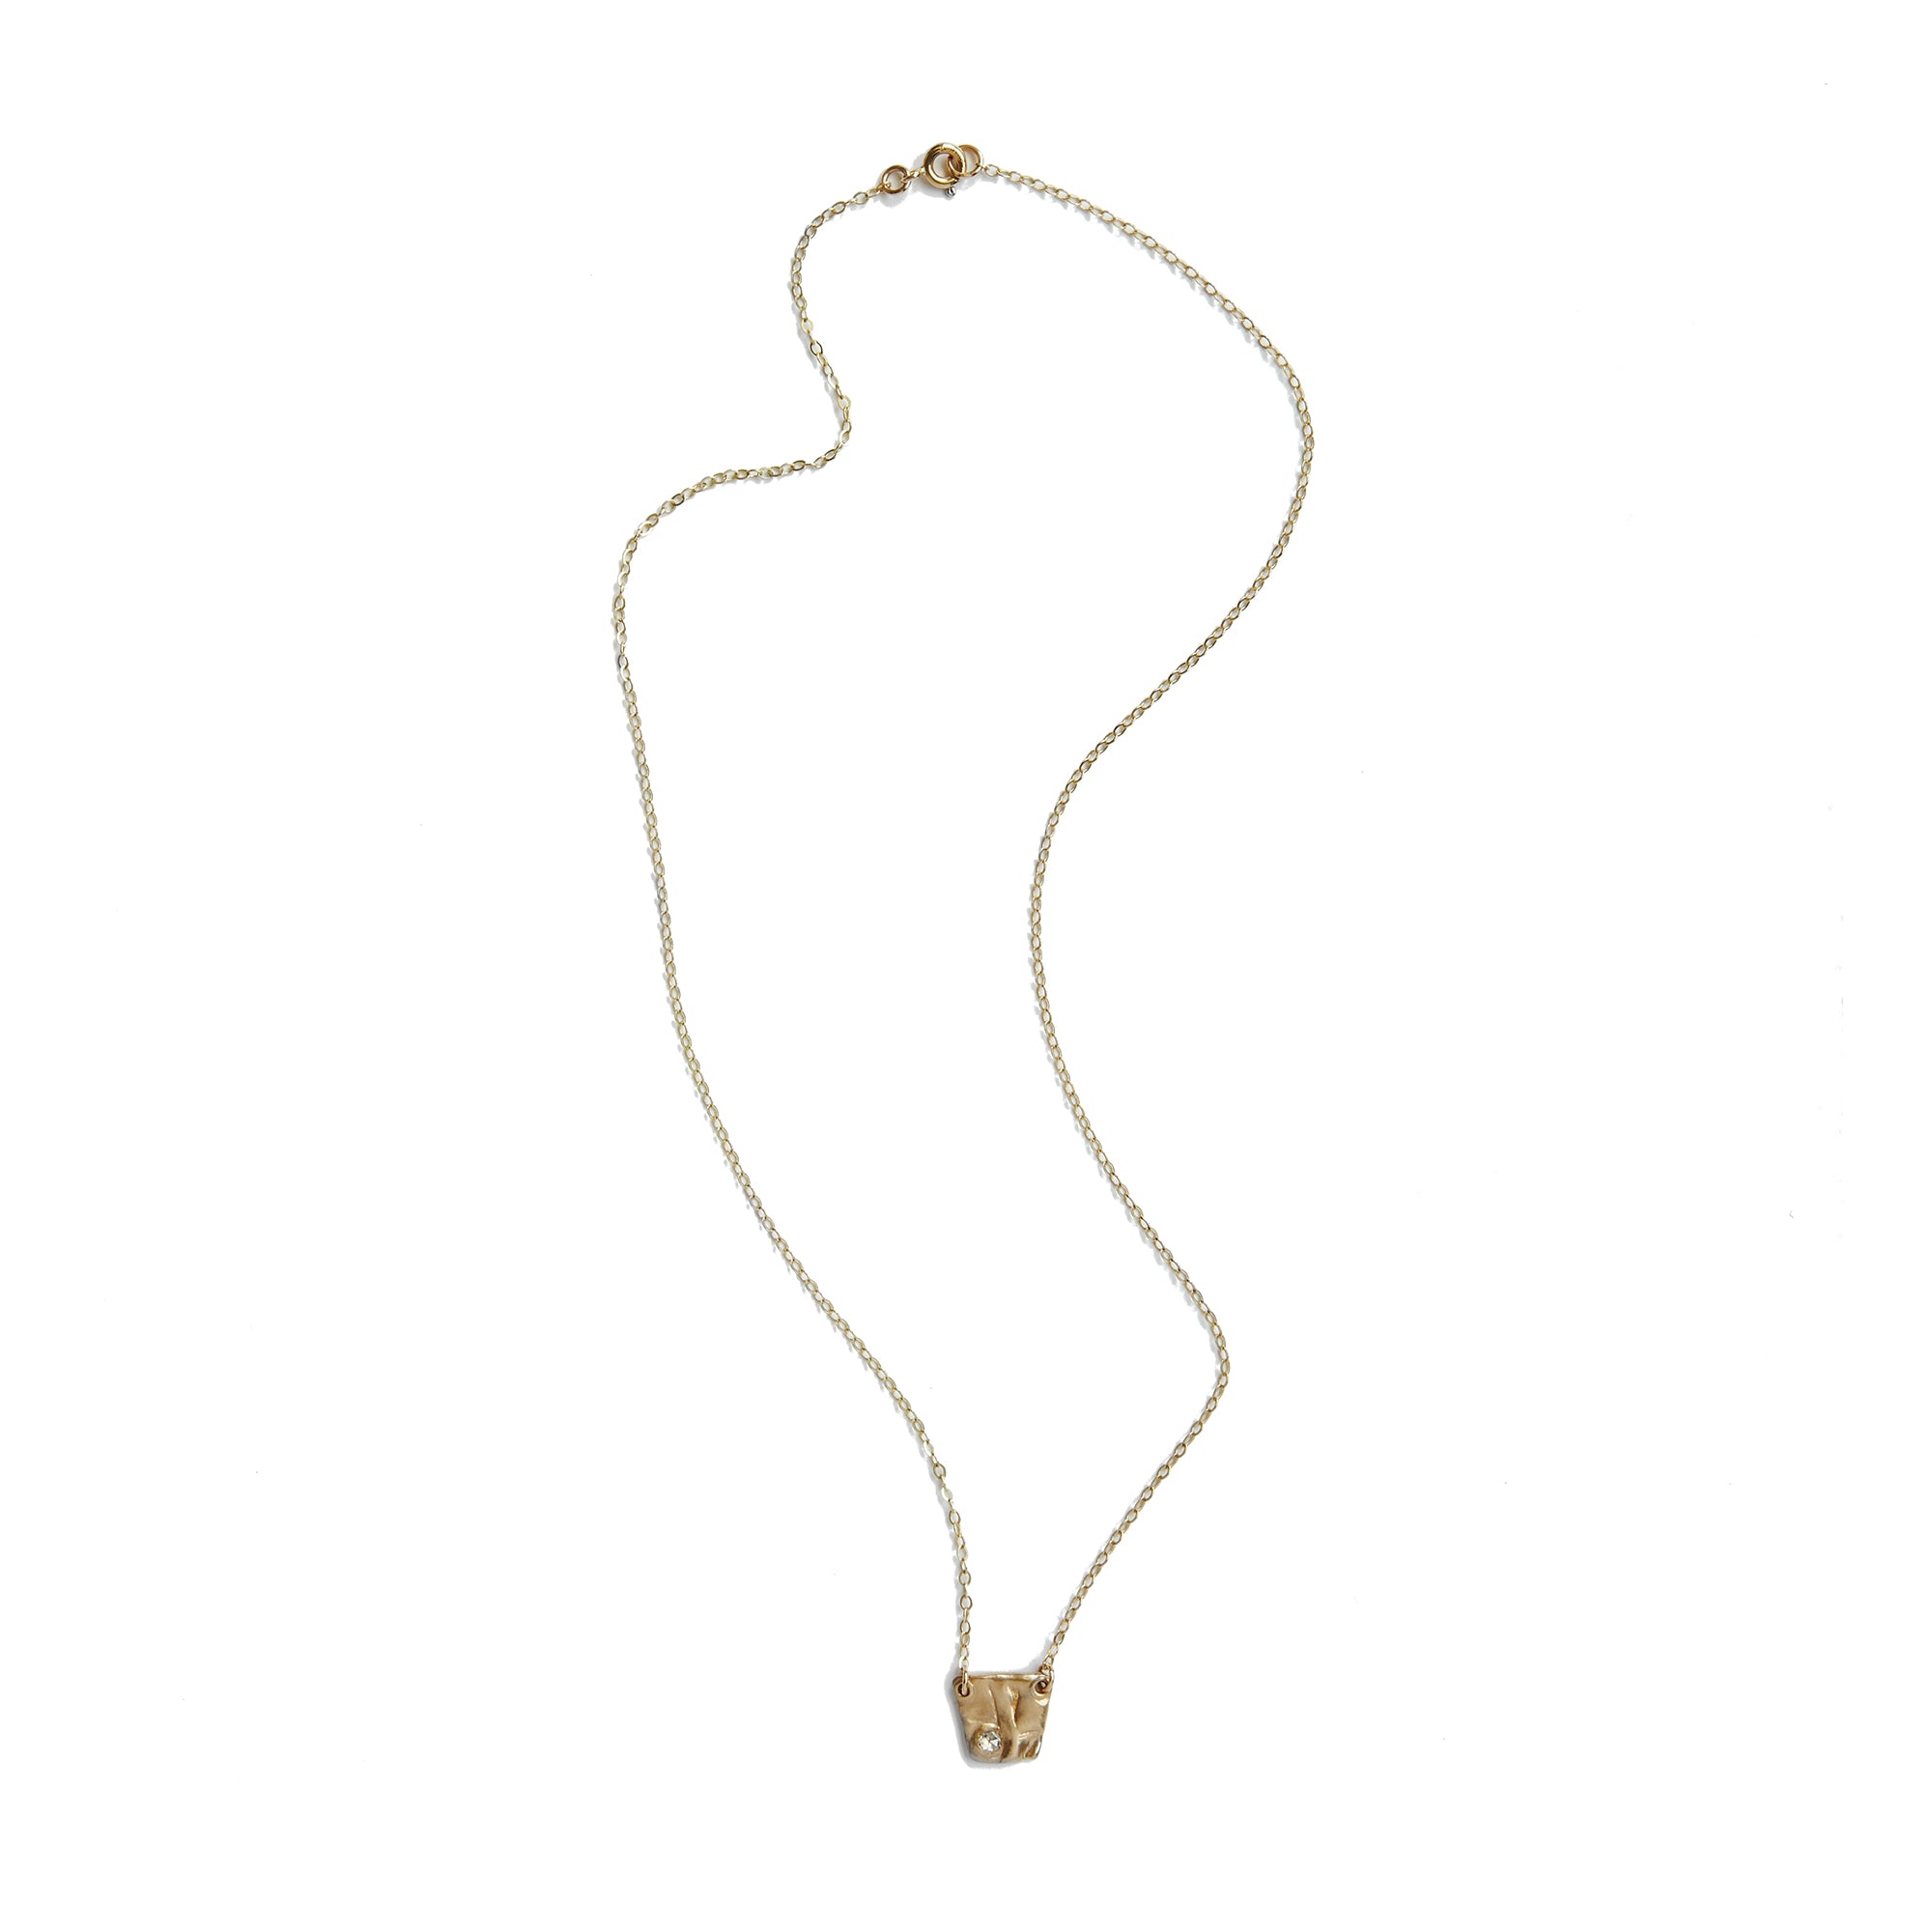 Our Pebble Necklace is a sweet pendant necklace with a rose cut diamond bezel set in solid 14k gold. 